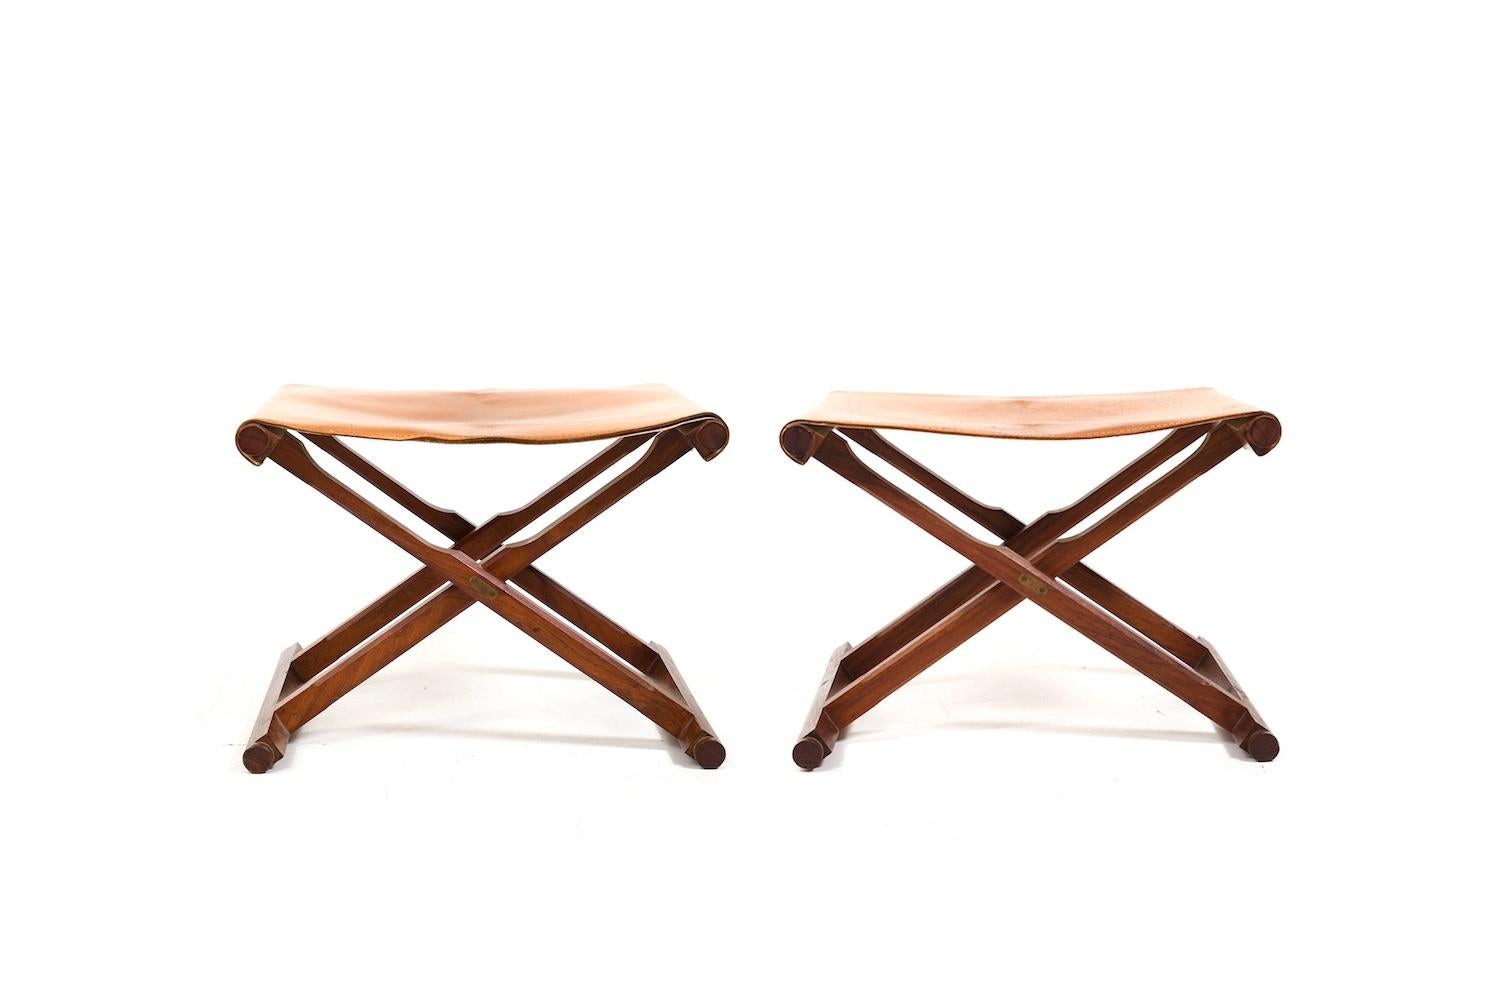 Scandinavian Modern Pair of  Danish Folding Stools in Teak and Leather 1960s For Sale